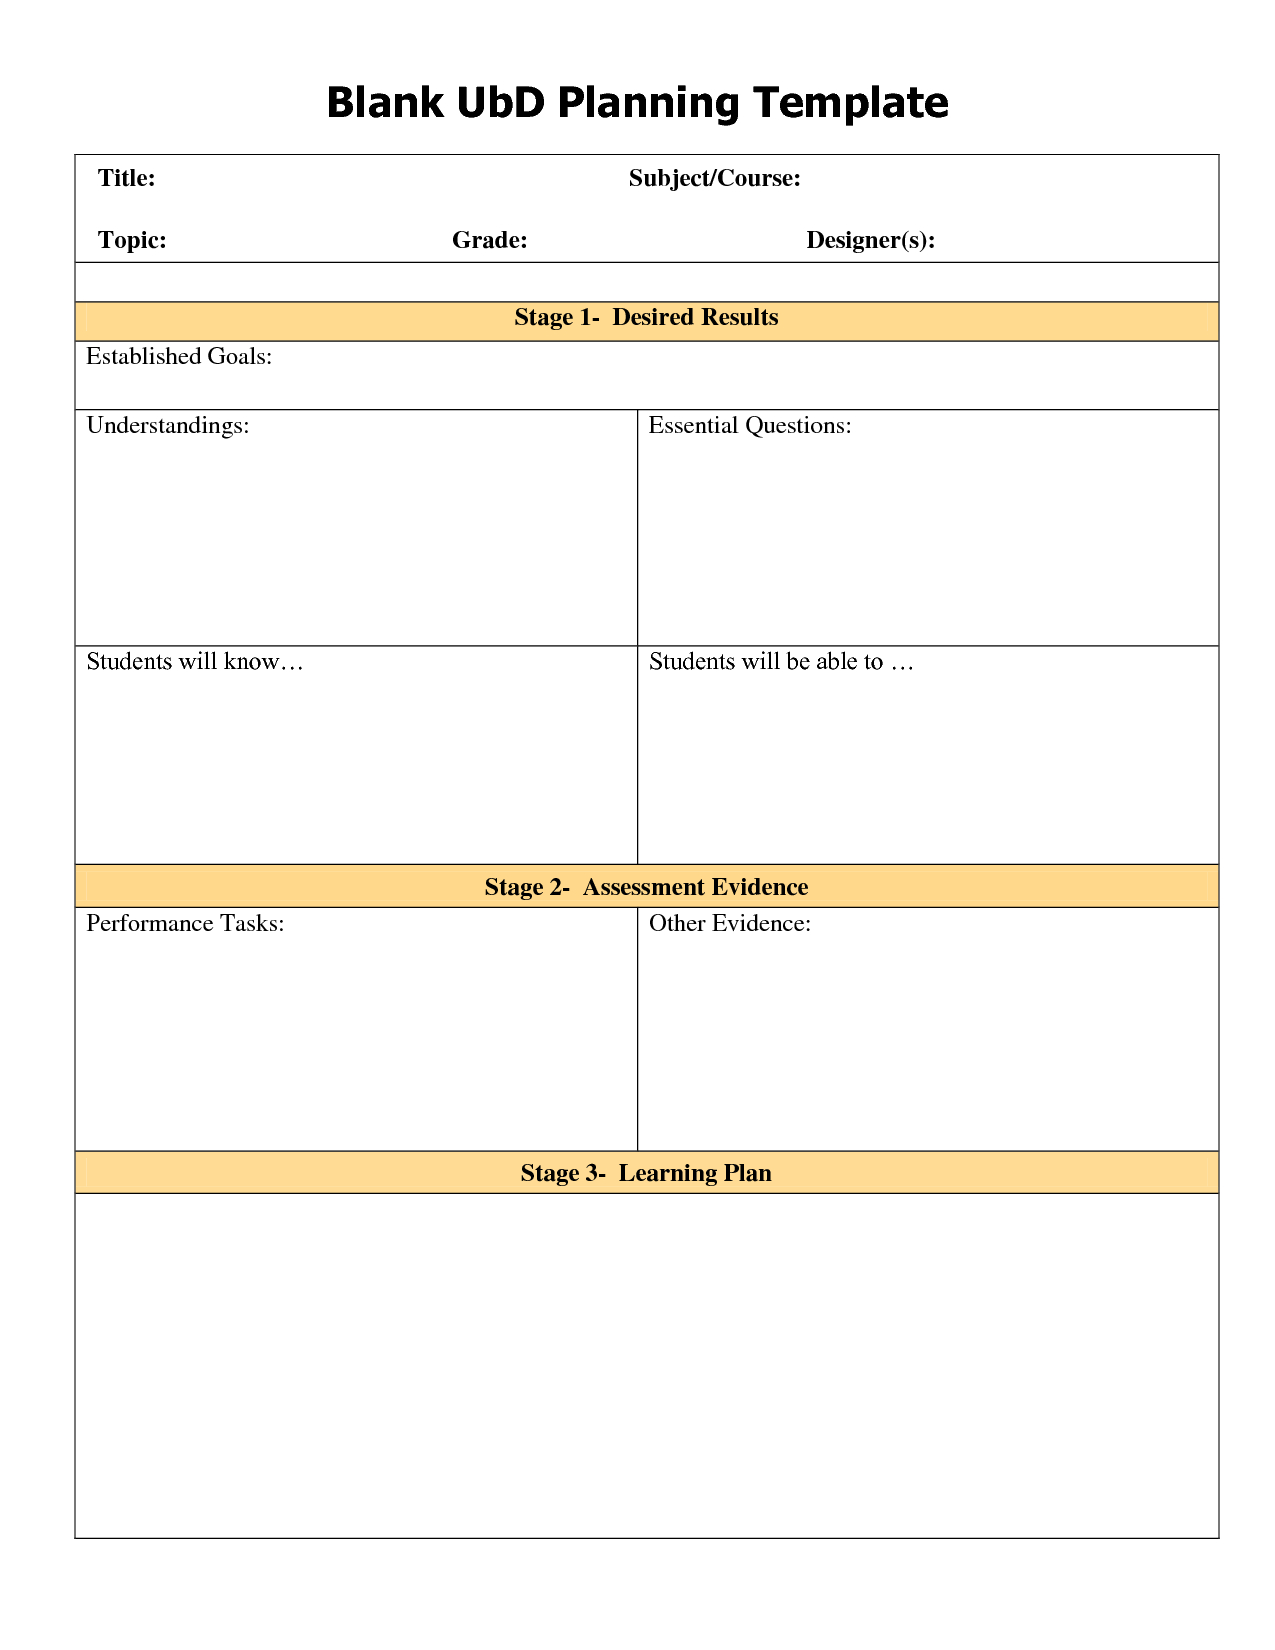 Blank Ubd Template | Blank Ubd Planning Template Inside Blank Unit Lesson Plan Template